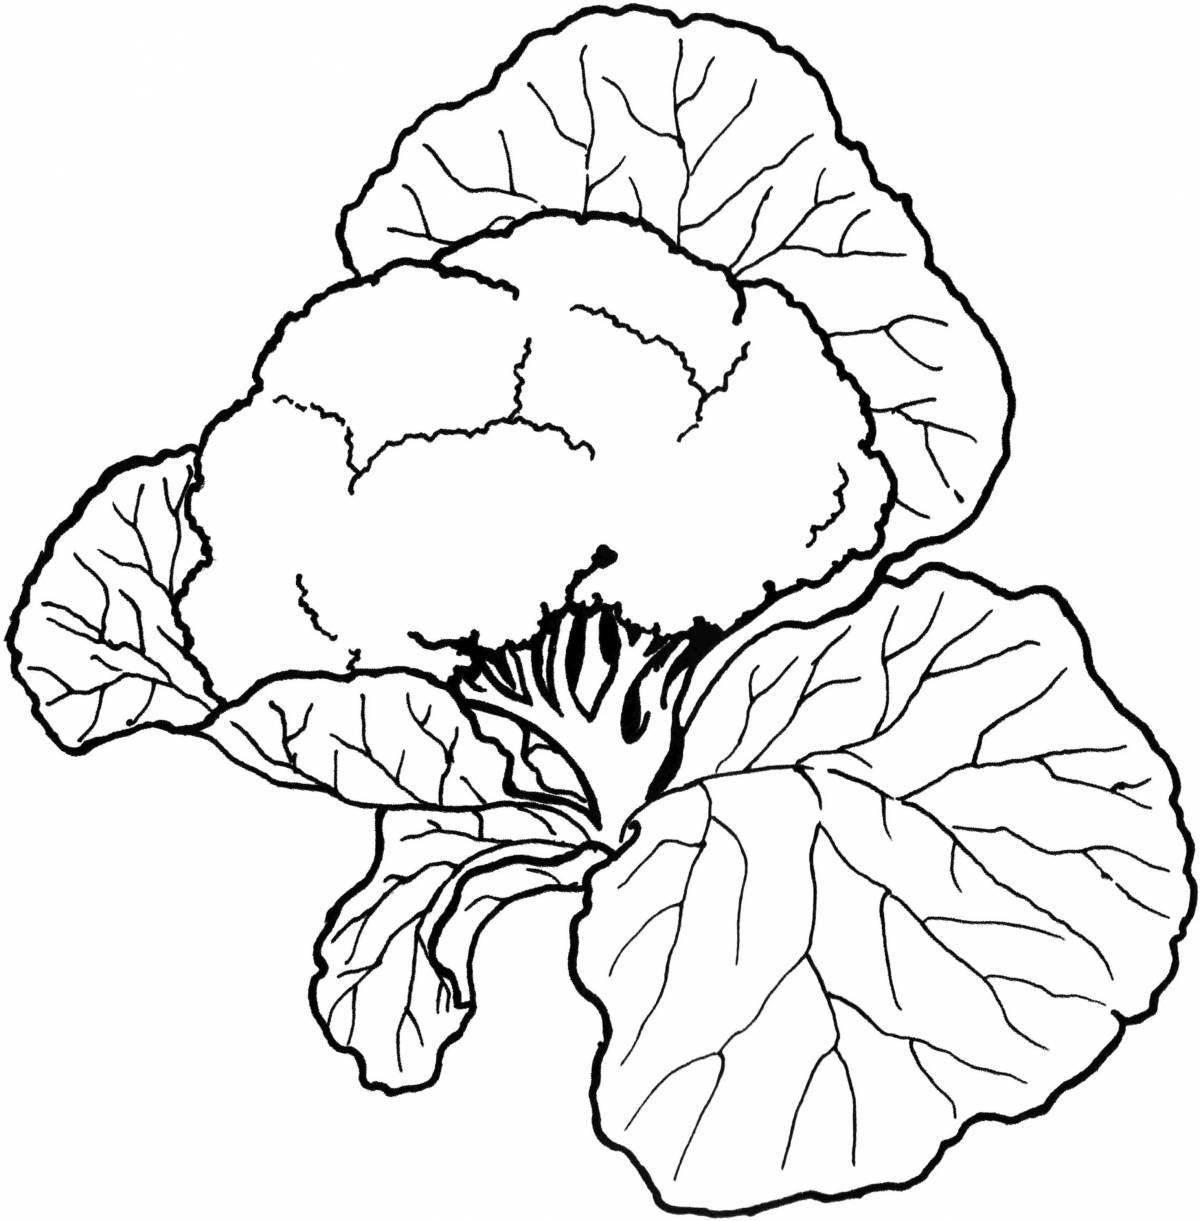 Coloring cute cabbage for children 3-4 years old